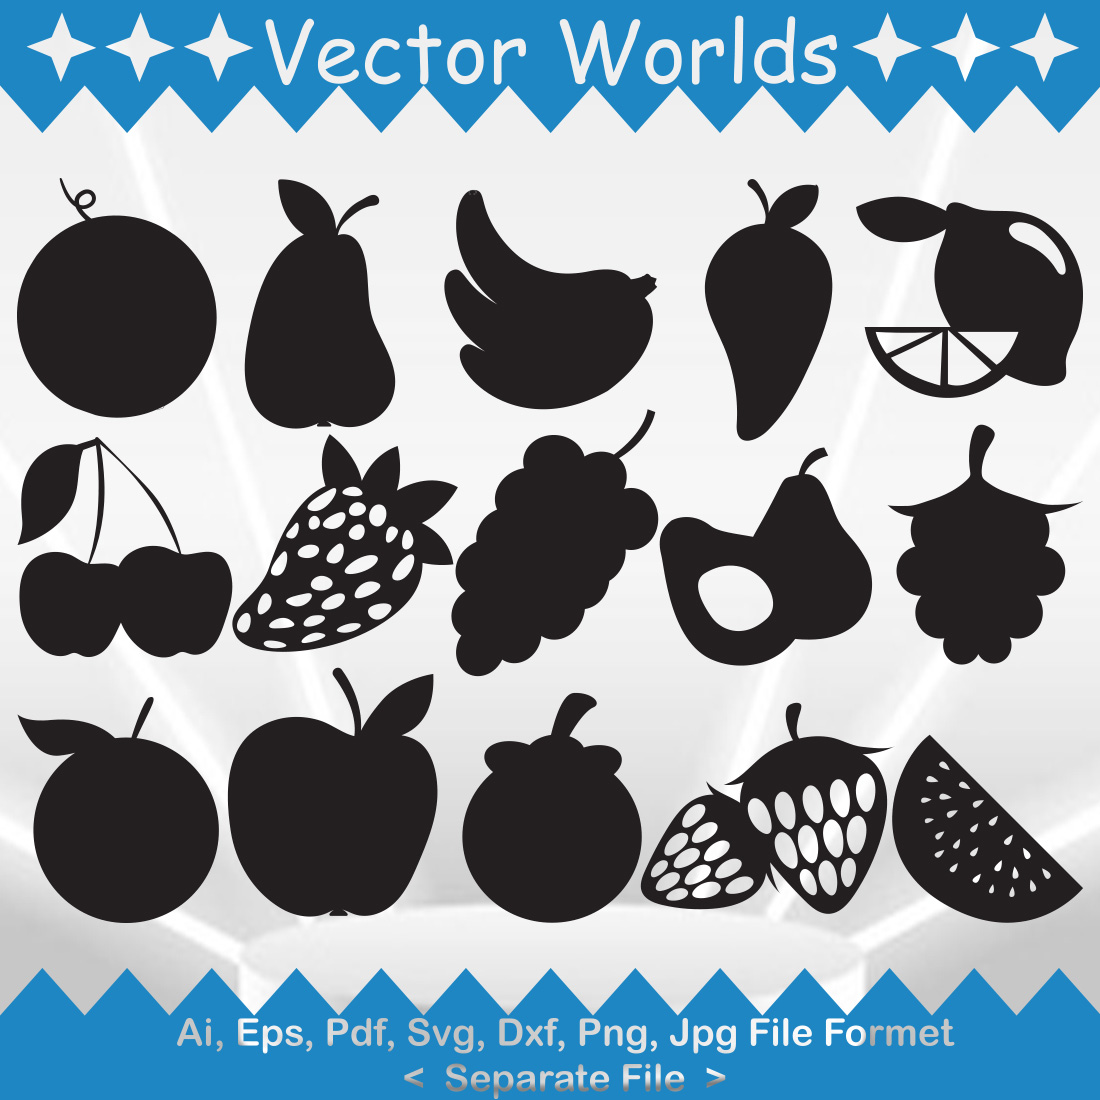 Set of beautiful images of fruit silhouettes